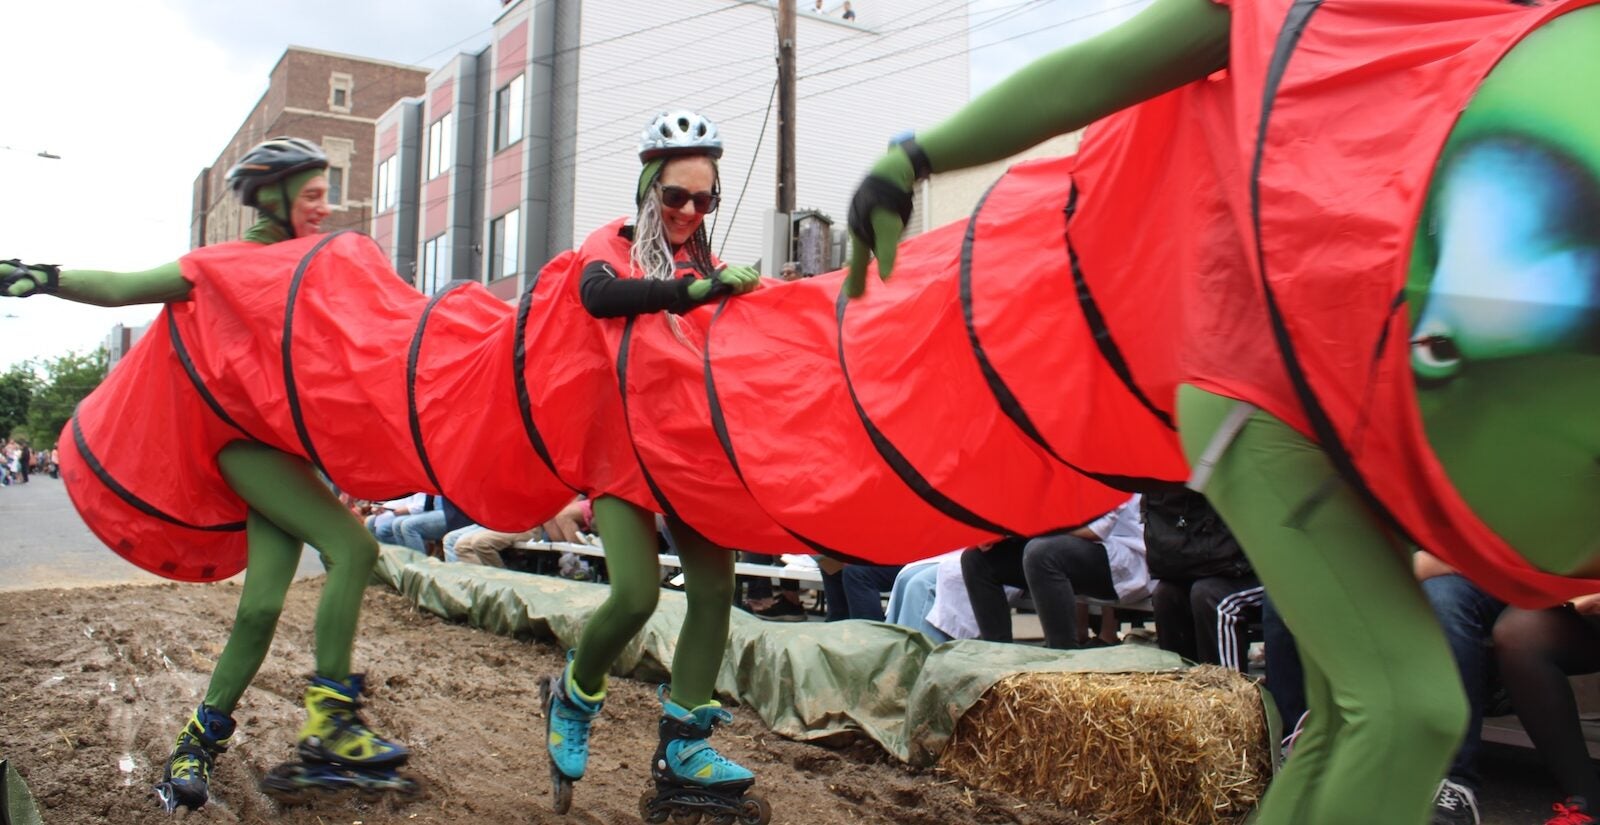 Kensington Derby participants dressed as a caterpillar on roller skates ride through the mud pit